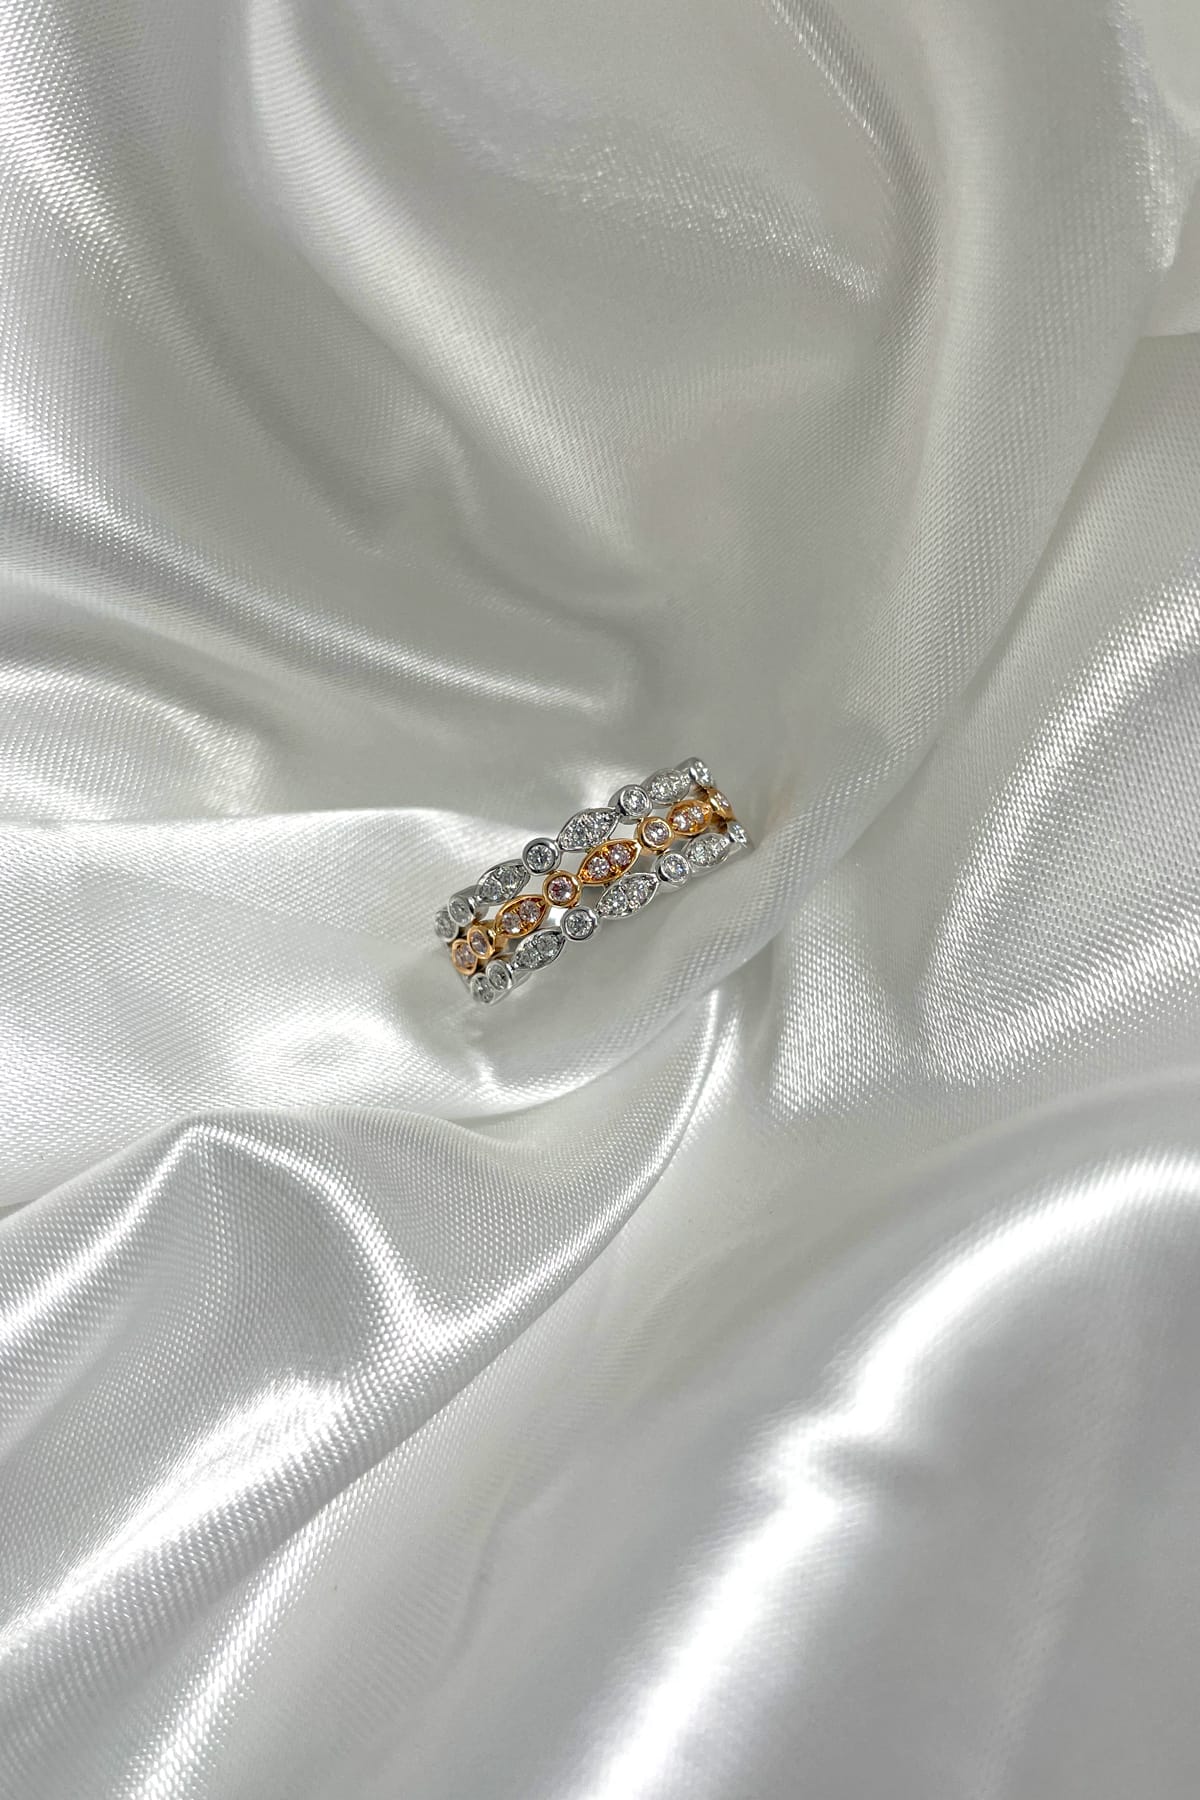 18 Carat White And Rose Gold 3 Row Diamond Ring available at LeGassick Diamonds and Jewellery Gold Coast, Australia.